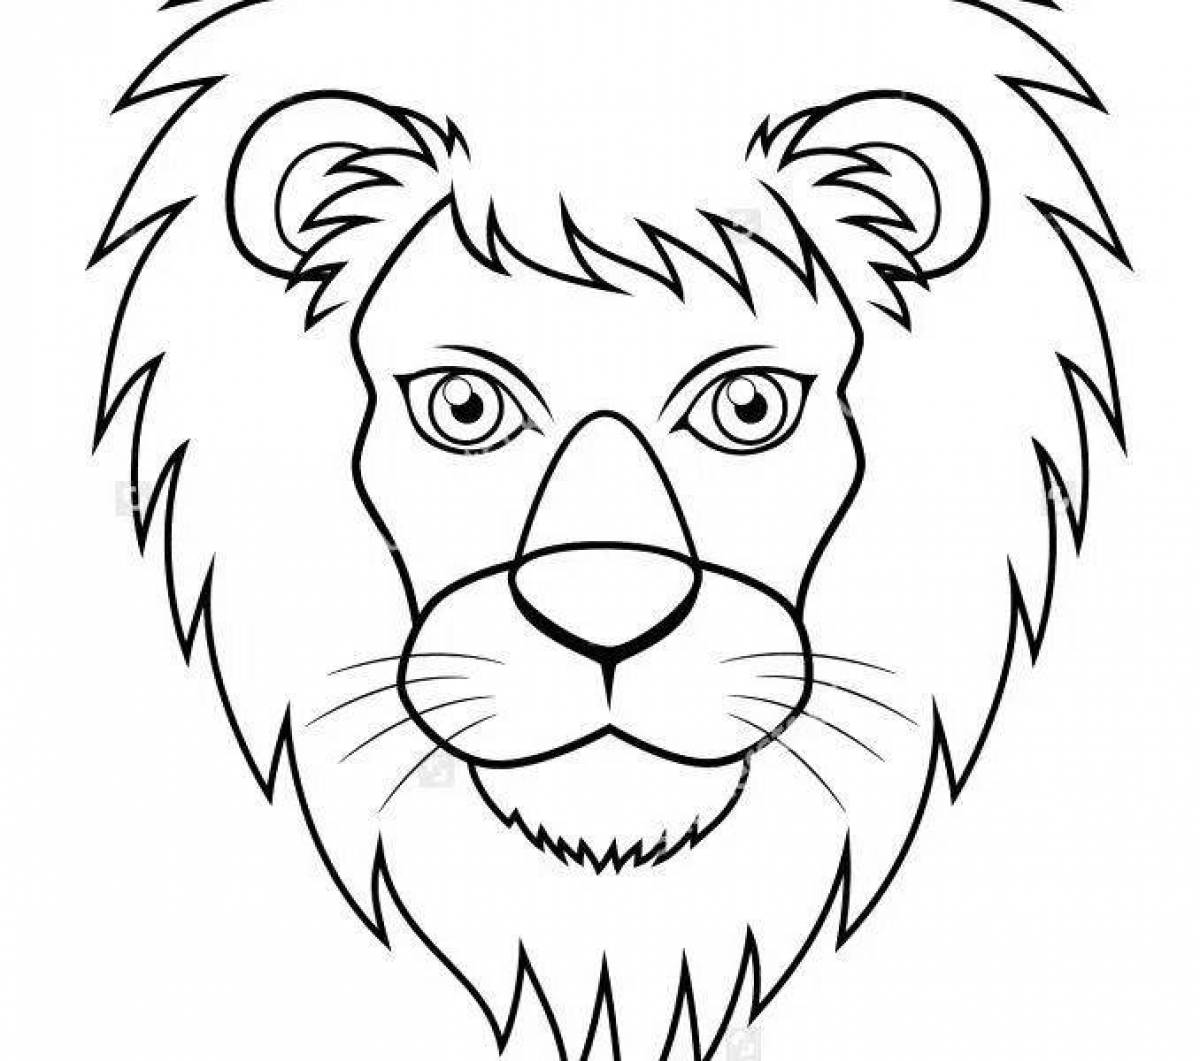 Colorful lion head coloring page